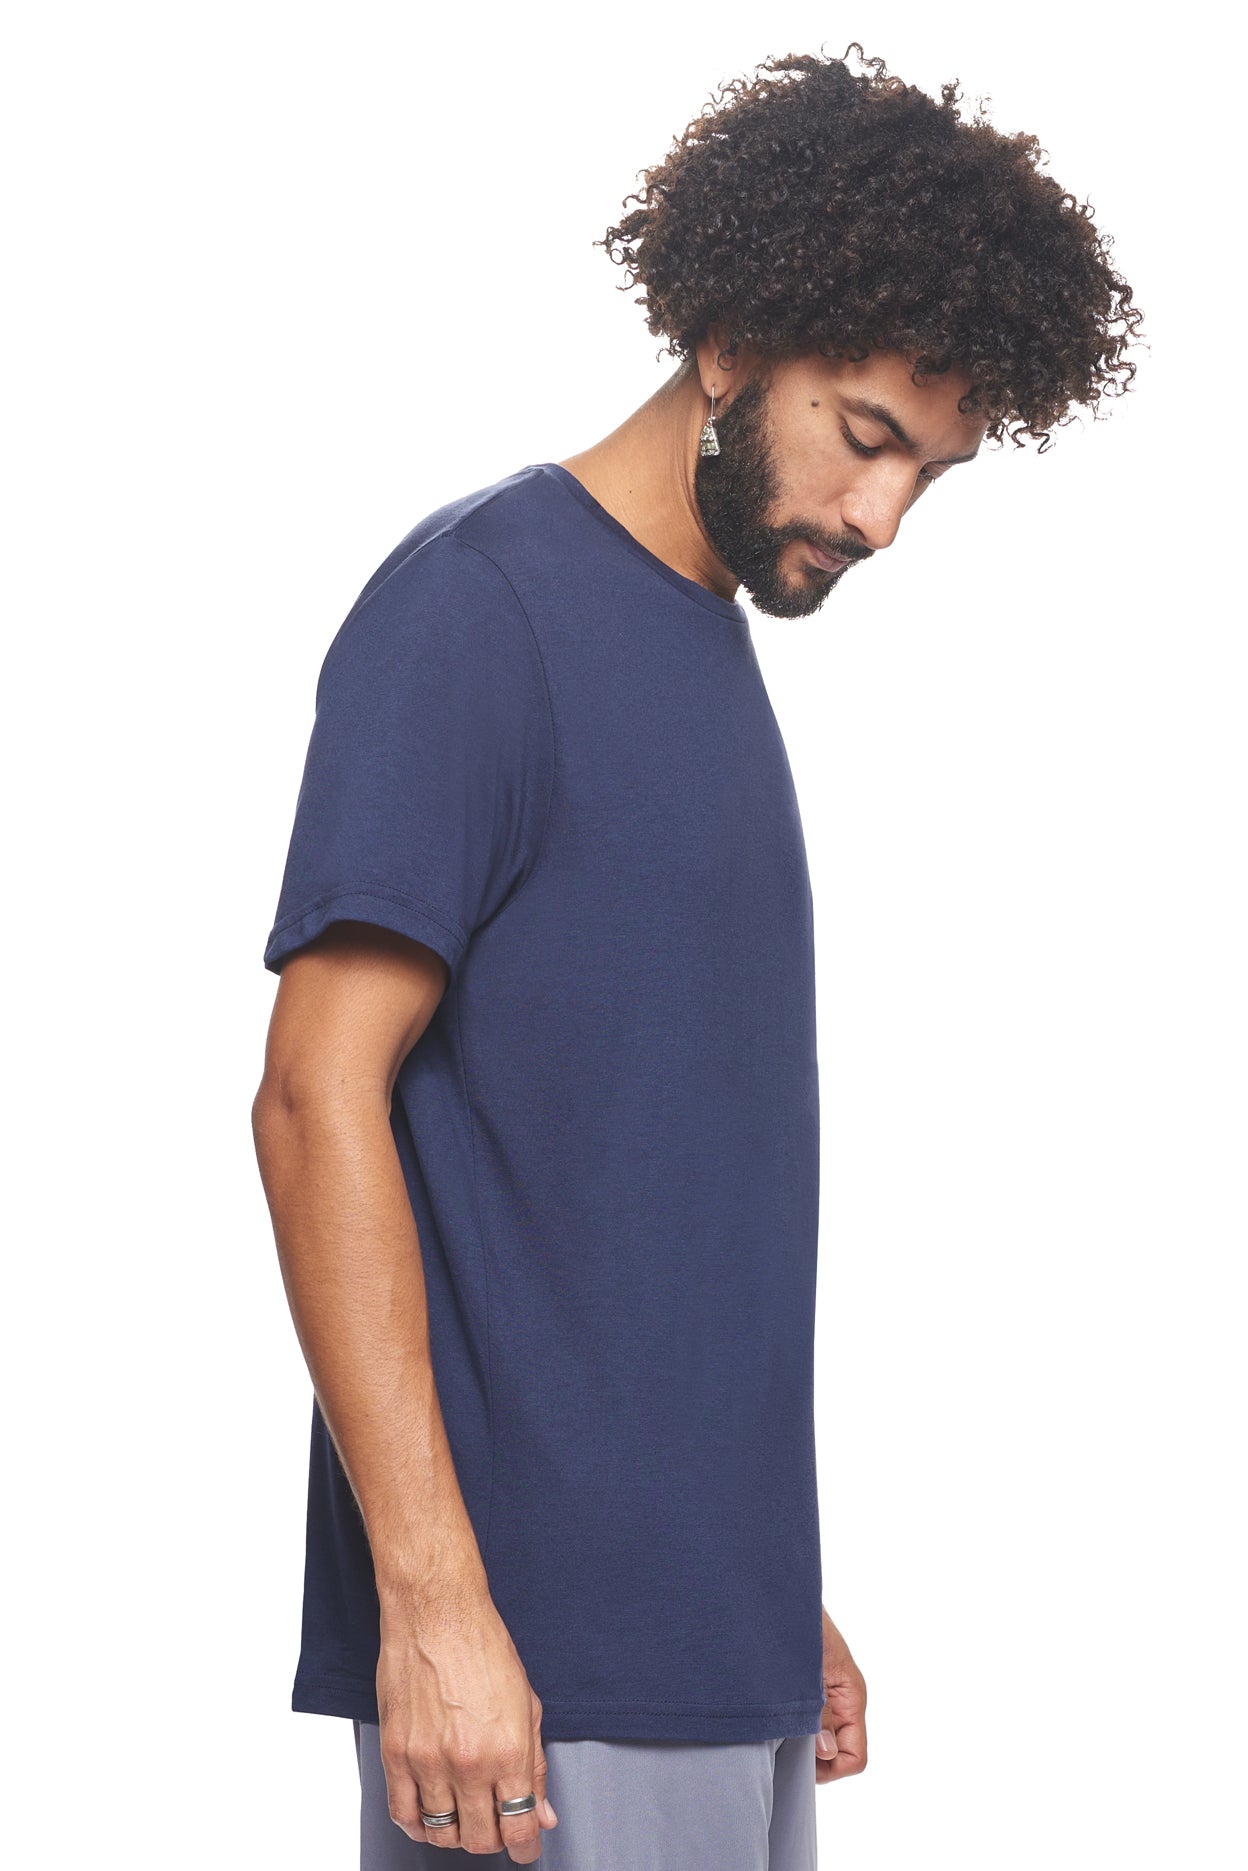 Expert Brand Wholesale Sustainable Eco-Friendly Hemp Organic Cotton Men's crewneck T-Shirt Made in the USA deep pacific blue 2#deep-pacific